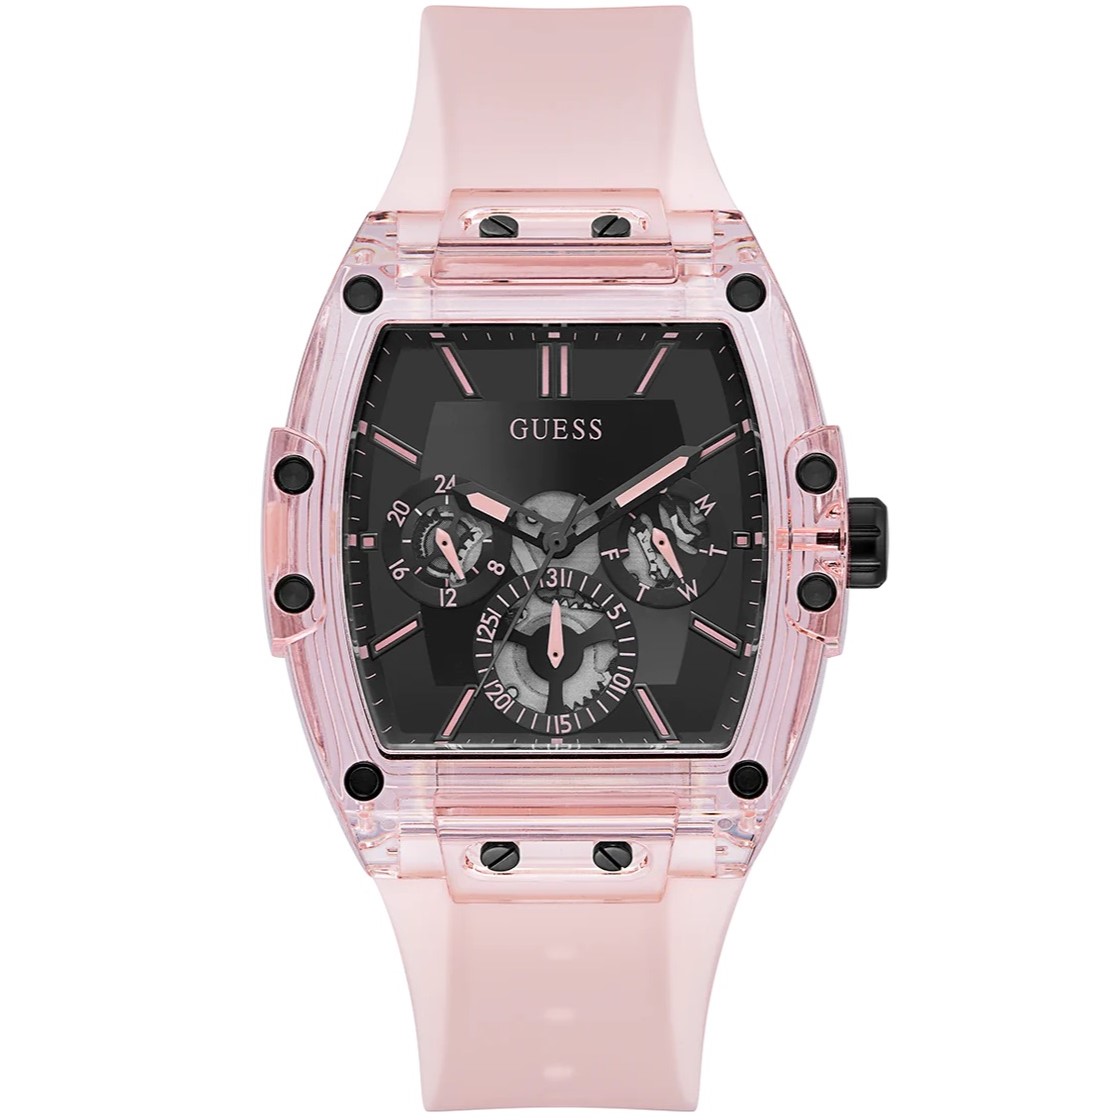 ĐỒNG HỒ GUESS PINK MULTIFUNCTION WATCH GW0203G11 5